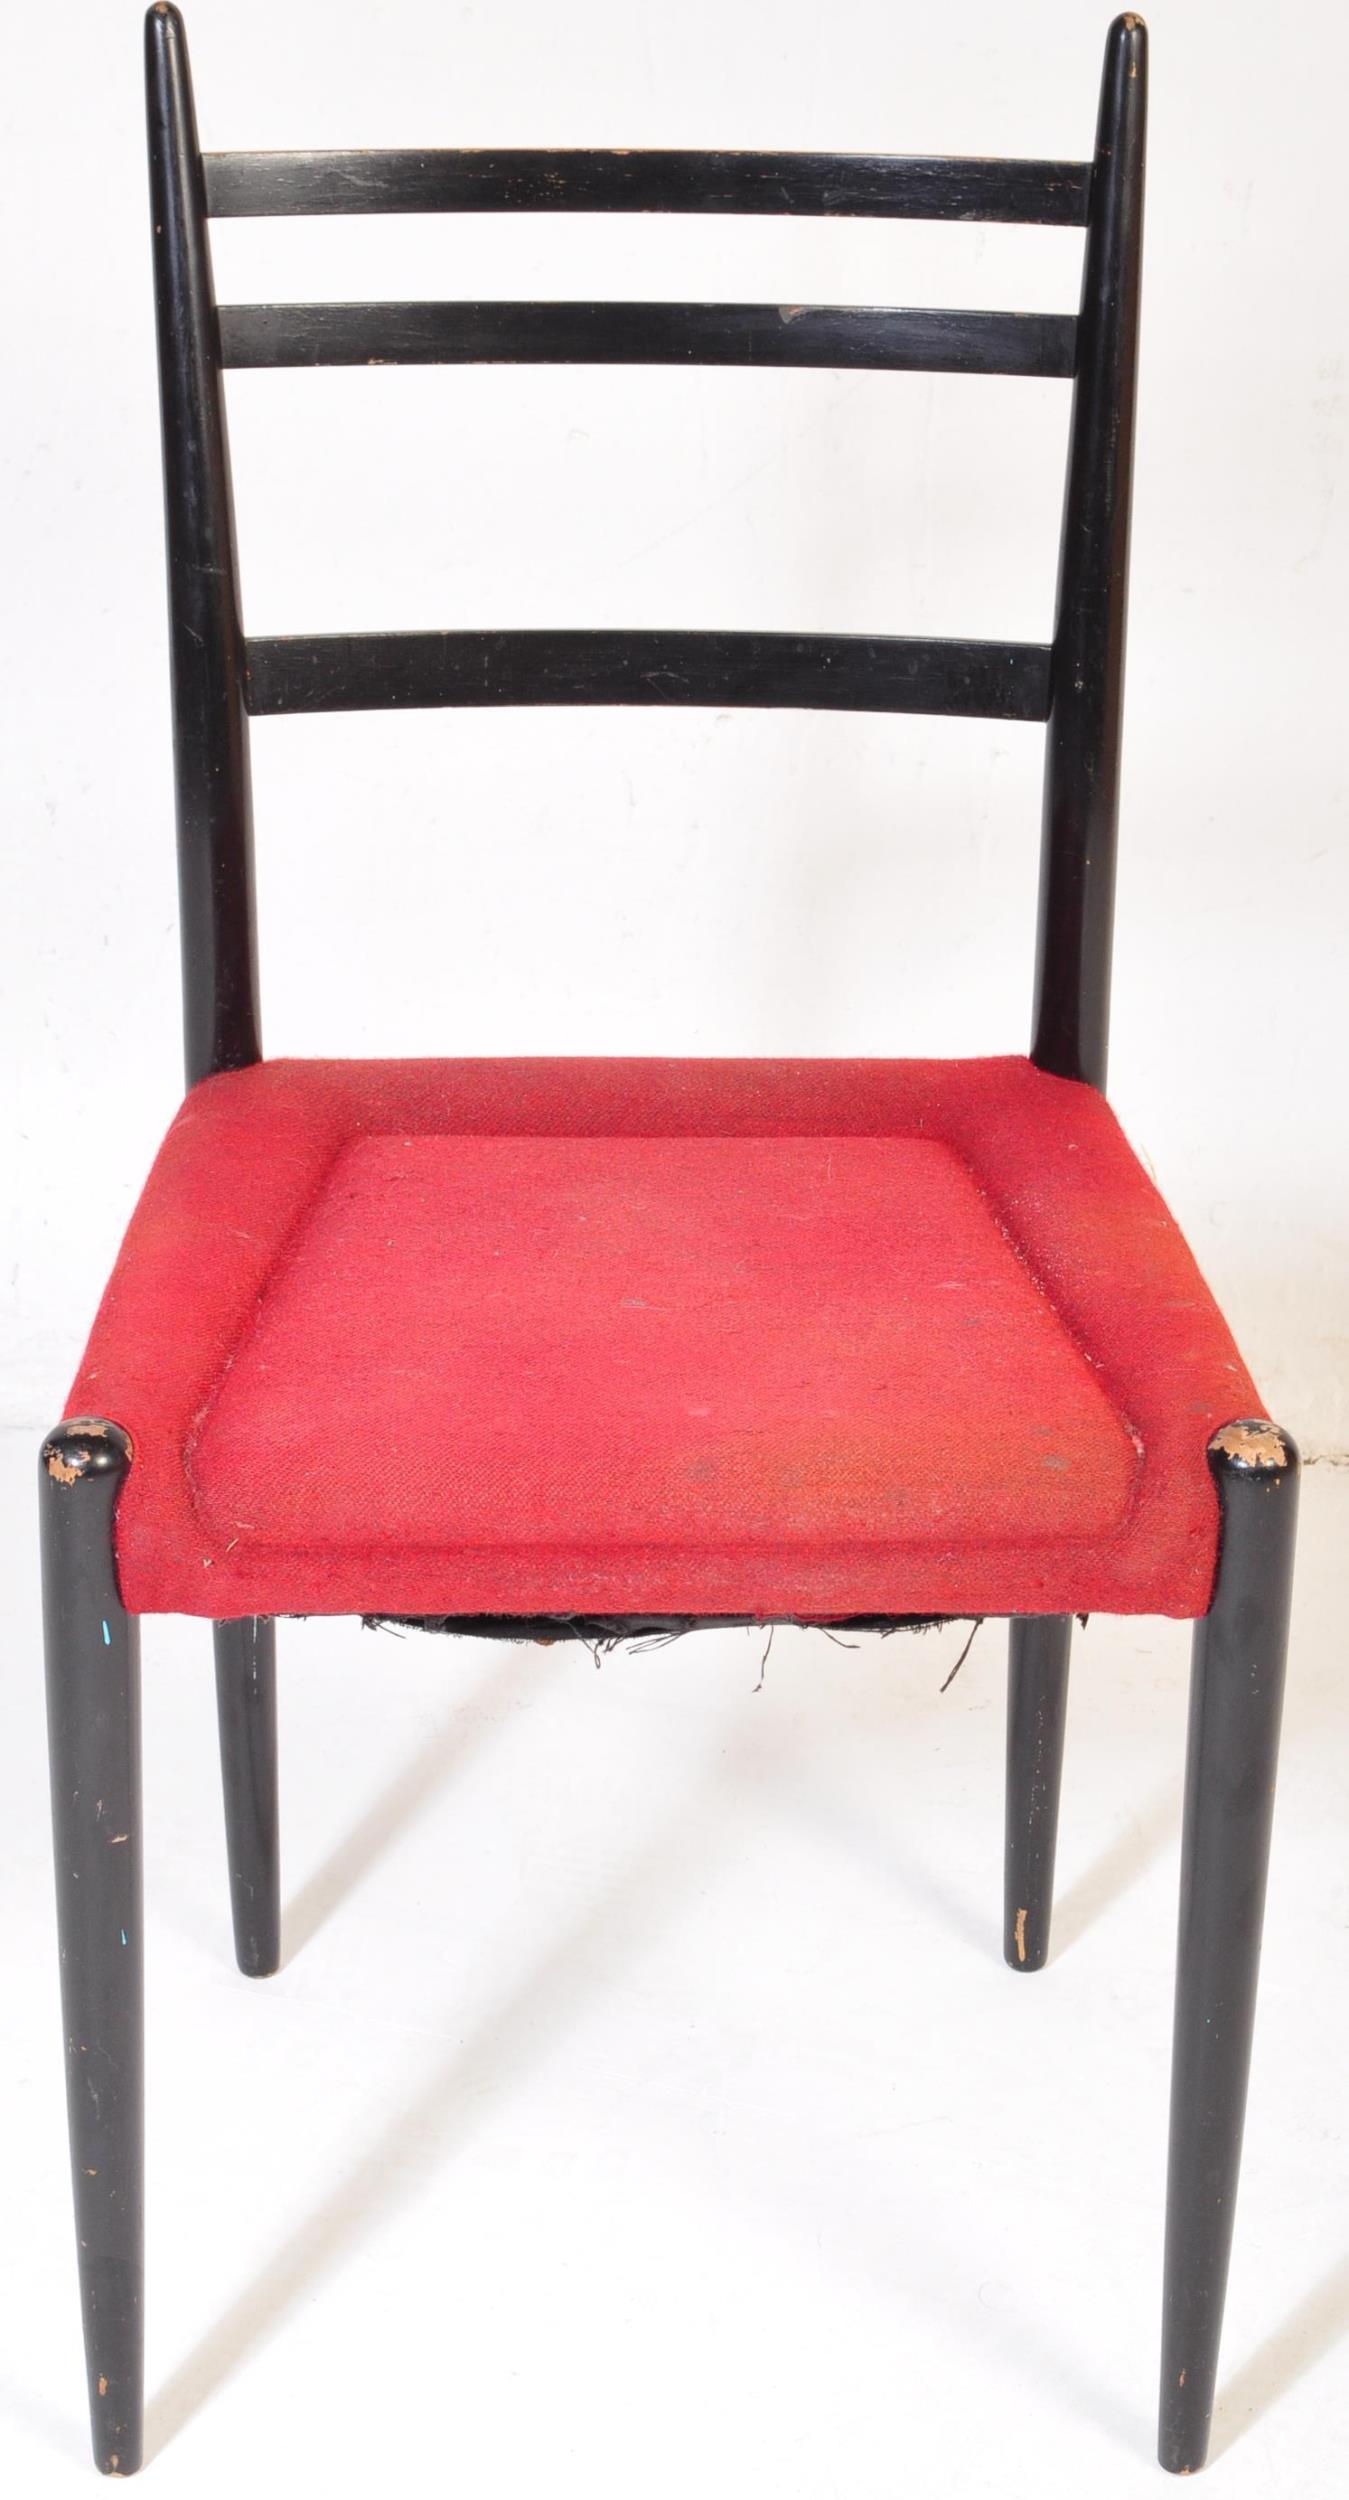 FOUR RETRO MID 20TH CENTURY EBONISED DINING CHAIRS - Image 4 of 5